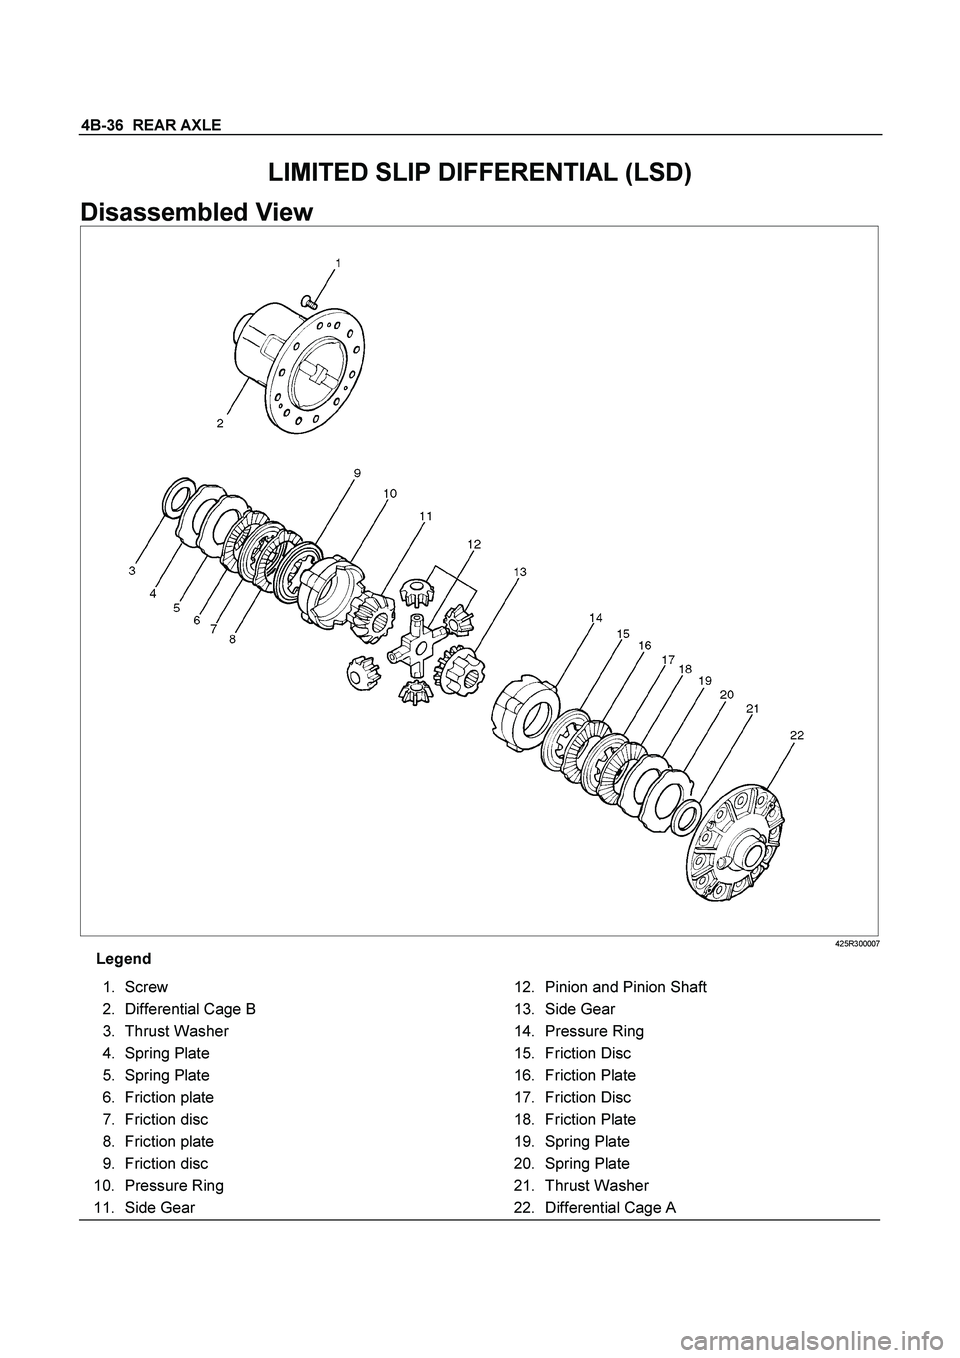 ISUZU TF SERIES 2004  Workshop Manual 4B-36  REAR AXLE
 
LIMITED SLIP DIFFERENTIAL (LSD) 
Disassembled View 
425R300007
Legend
 
 1. Screw 
 2. Differential Cage B 
 3. Thrust Washer 
 4. Spring Plate 
 5. Spring Plate 
 6. Friction plate